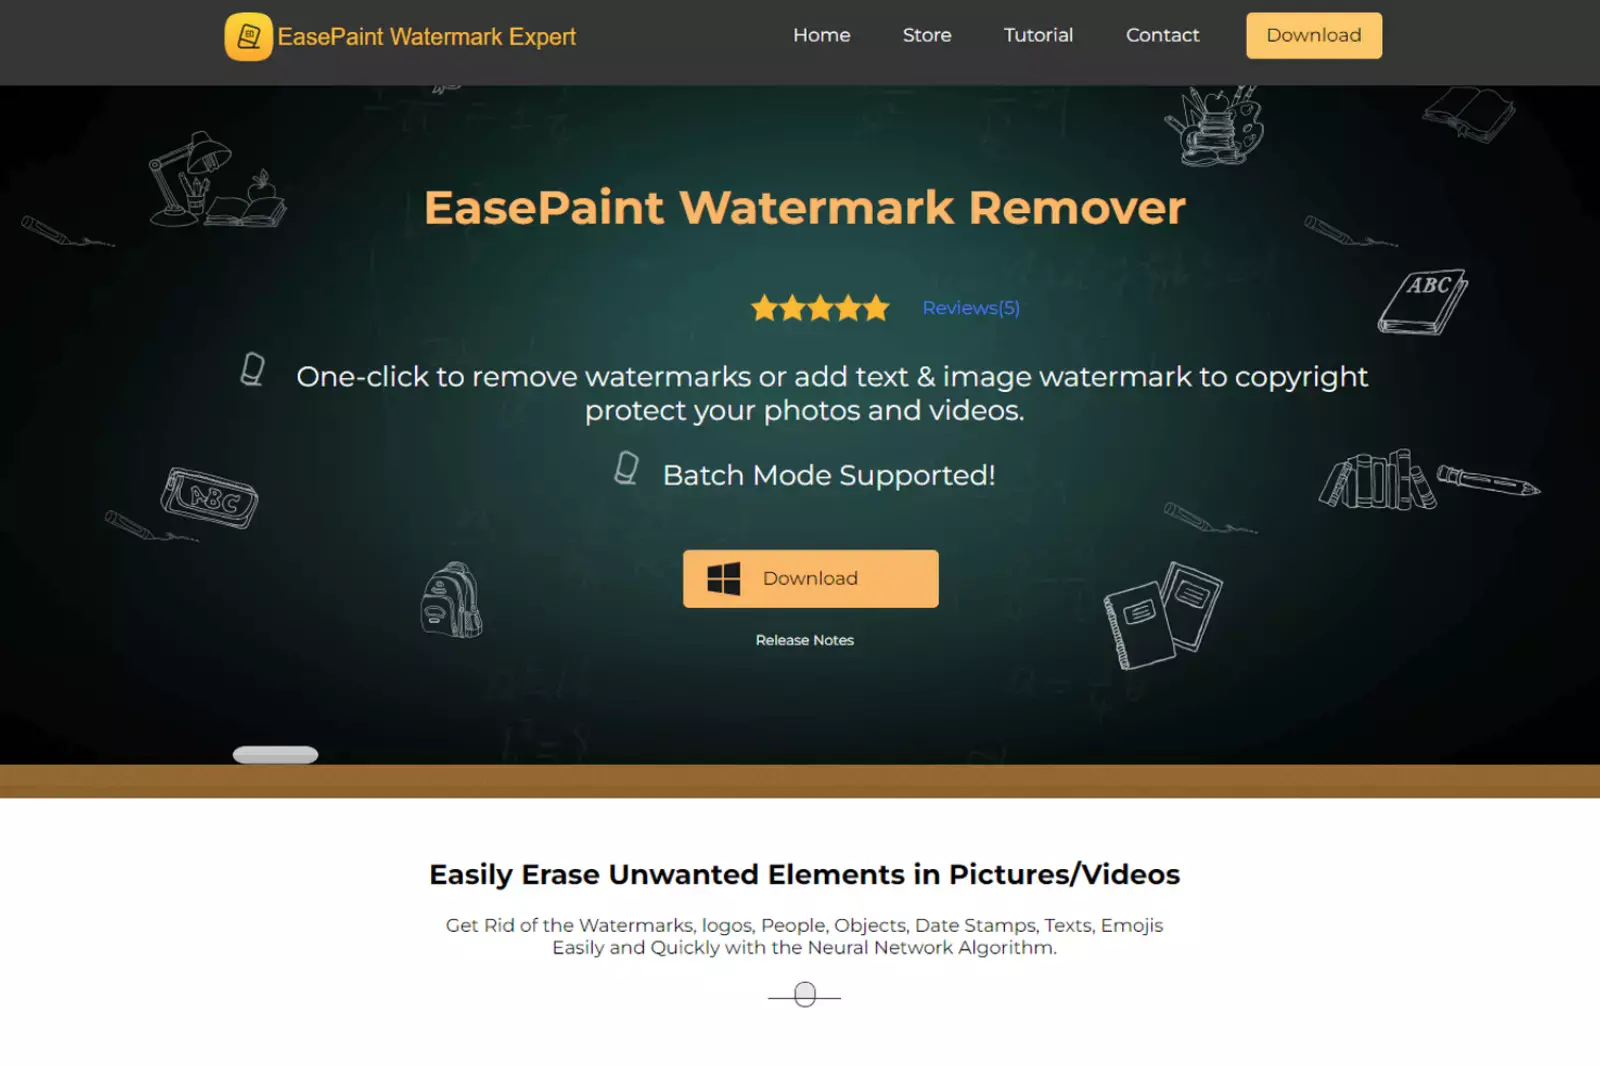 Home Page of EasePaint Watermark Remover